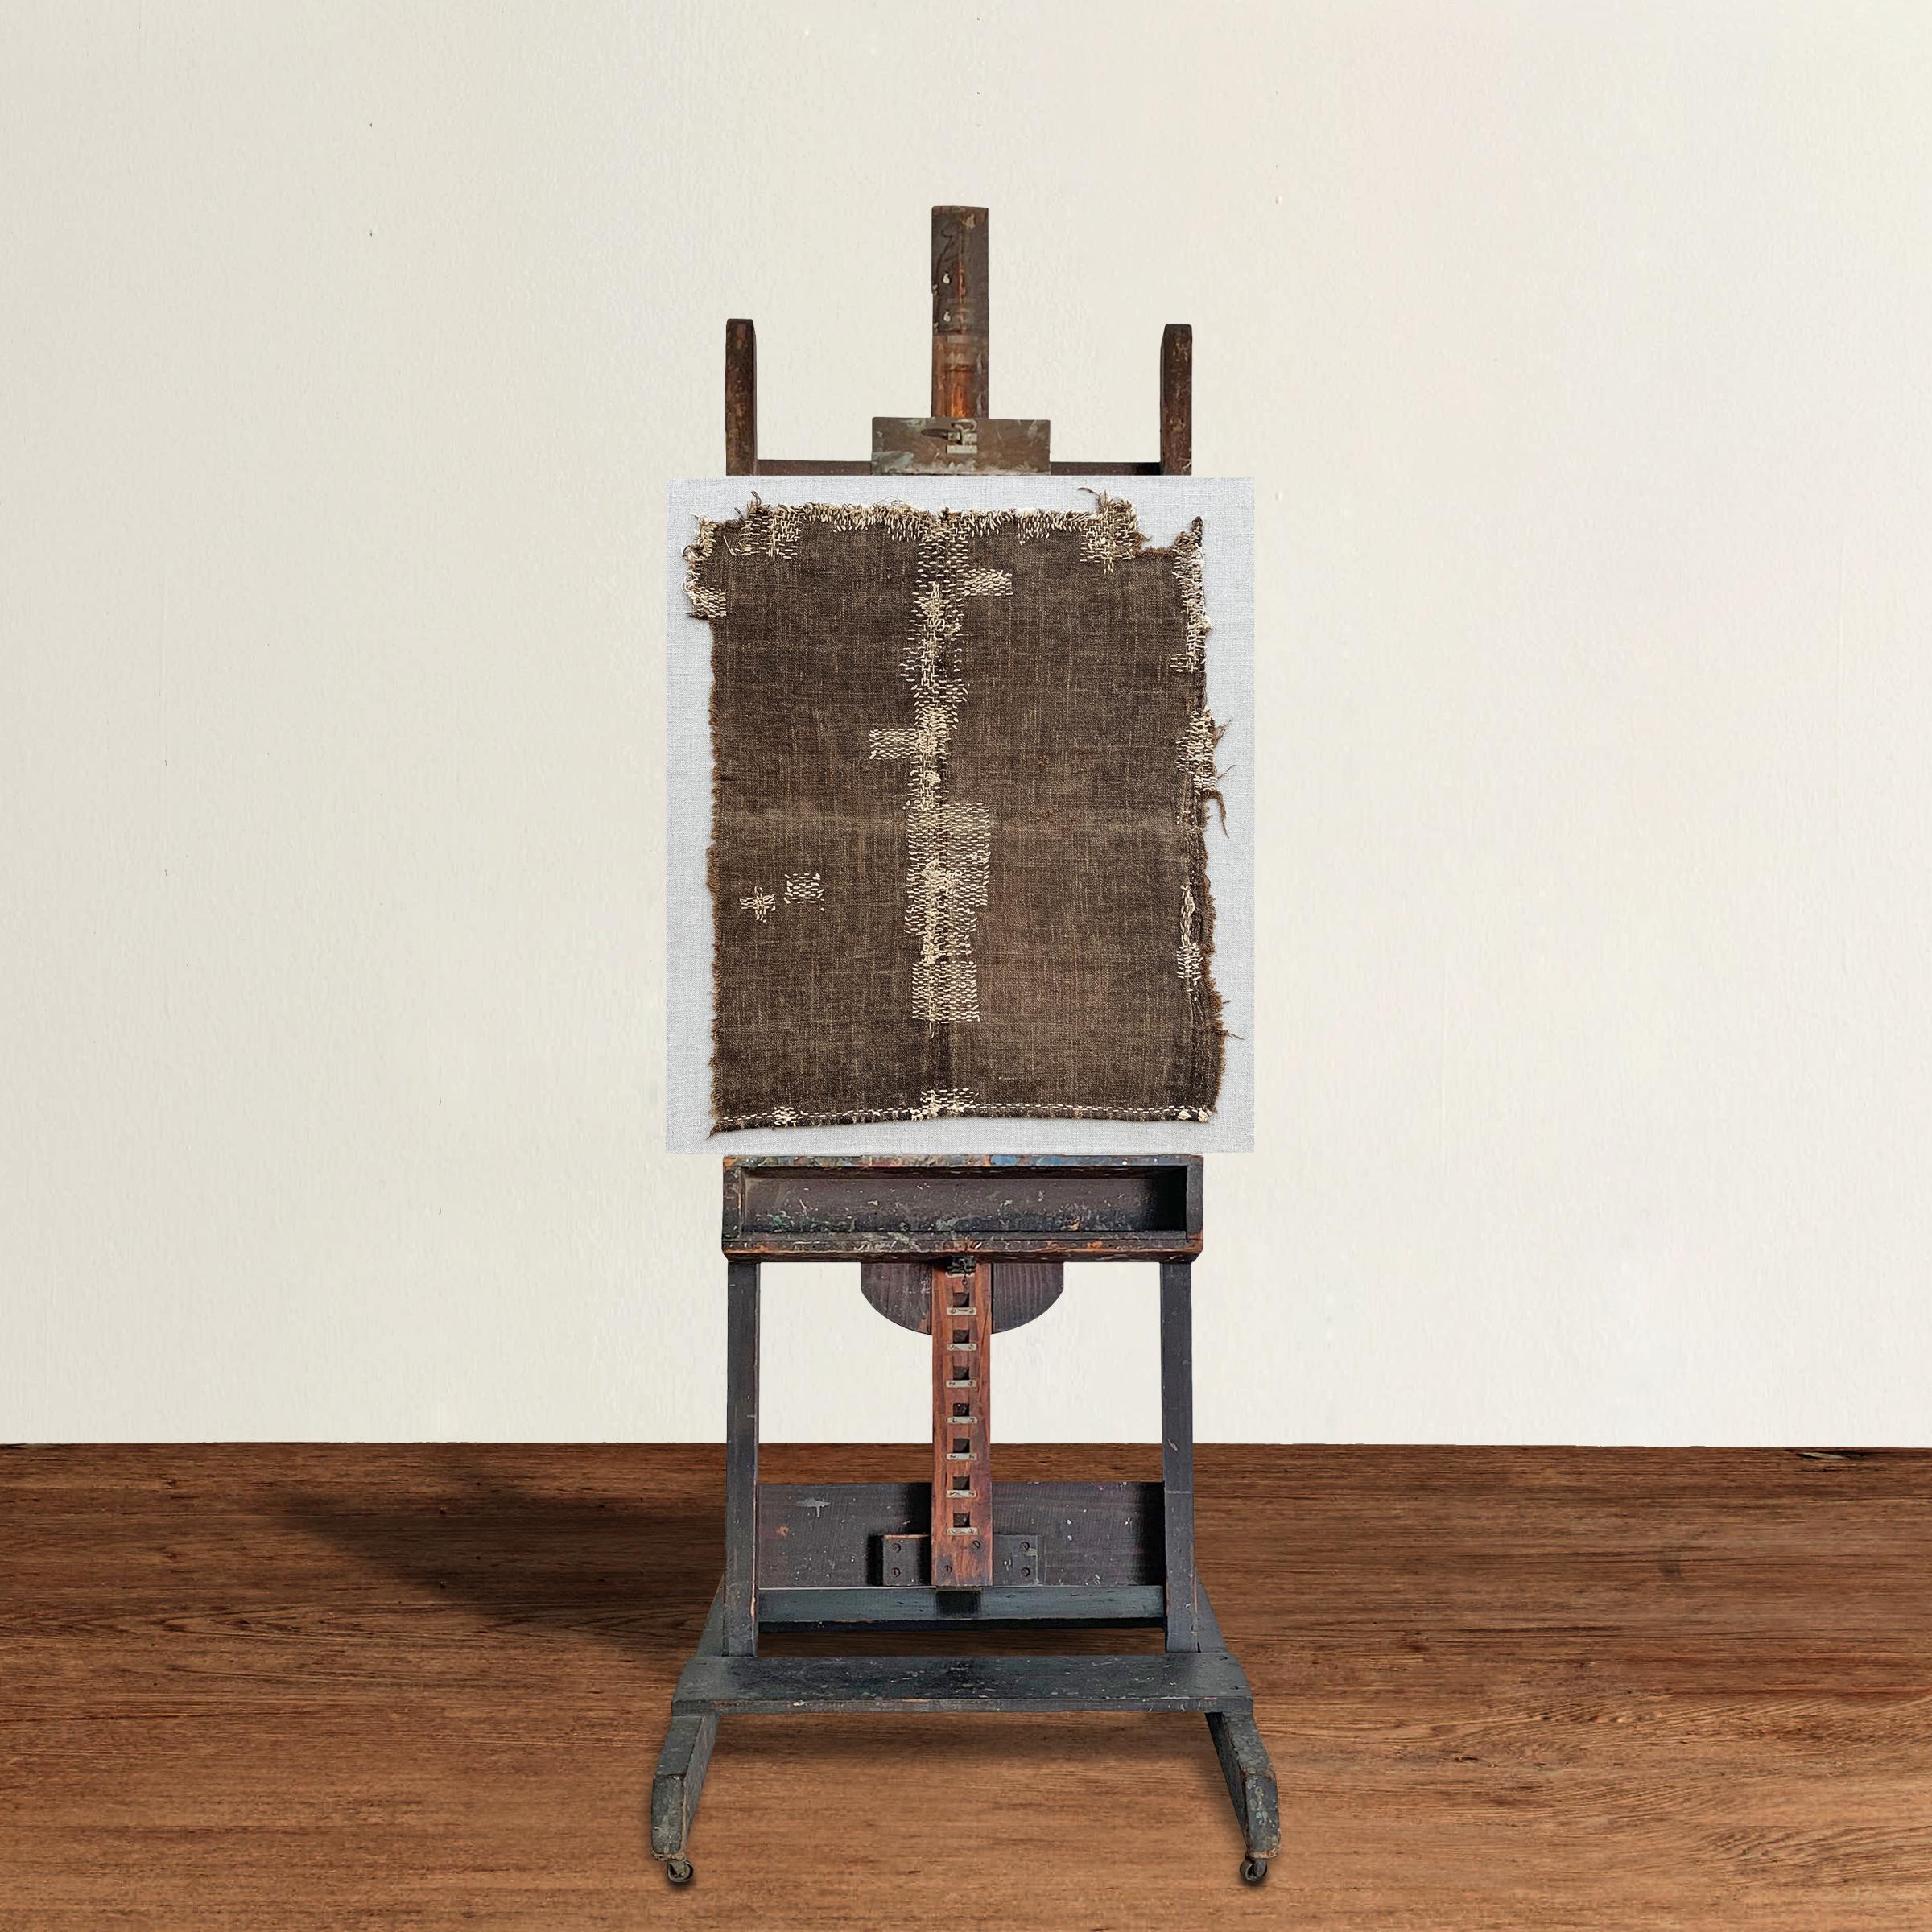 A wonderfully charming 19th century American wooden artist's easel, adjustable in pitch and height, and covered in over a hundred years of paint drips. Perfectly functional, but also excellent for displaying your favorite painting or for mounting